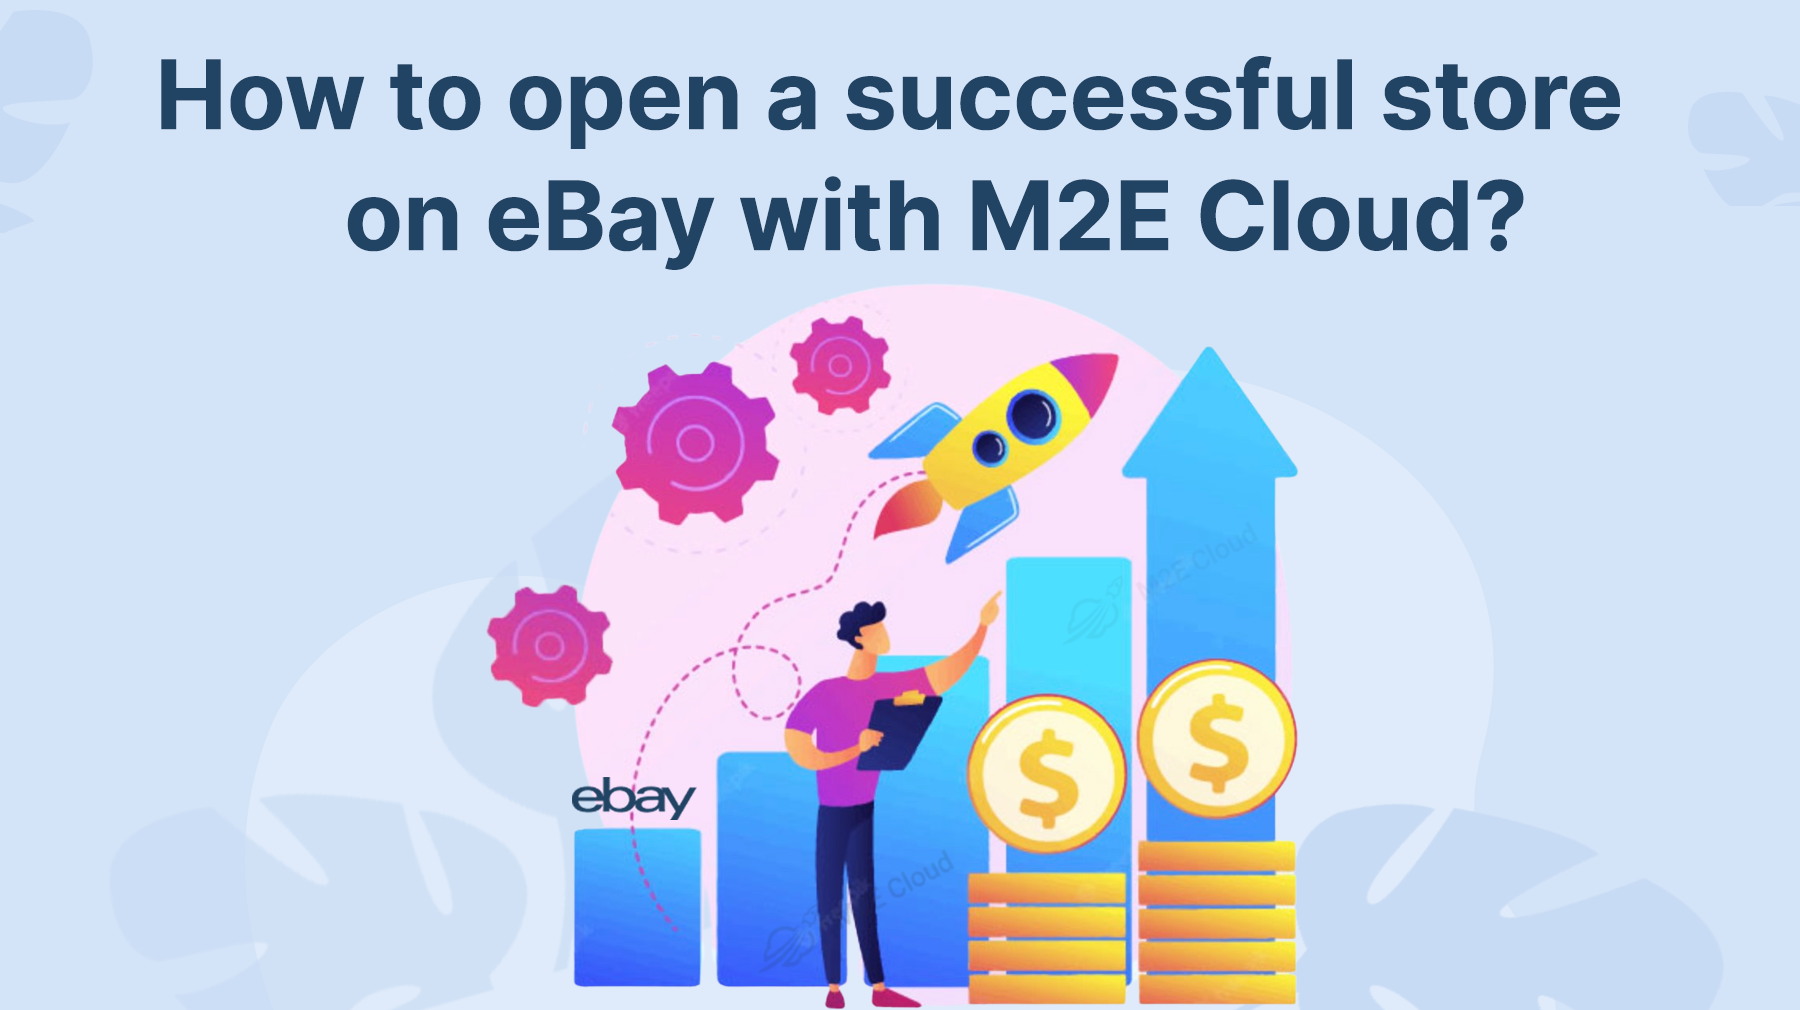 How to open a successful store on eBay with M2E Cloud